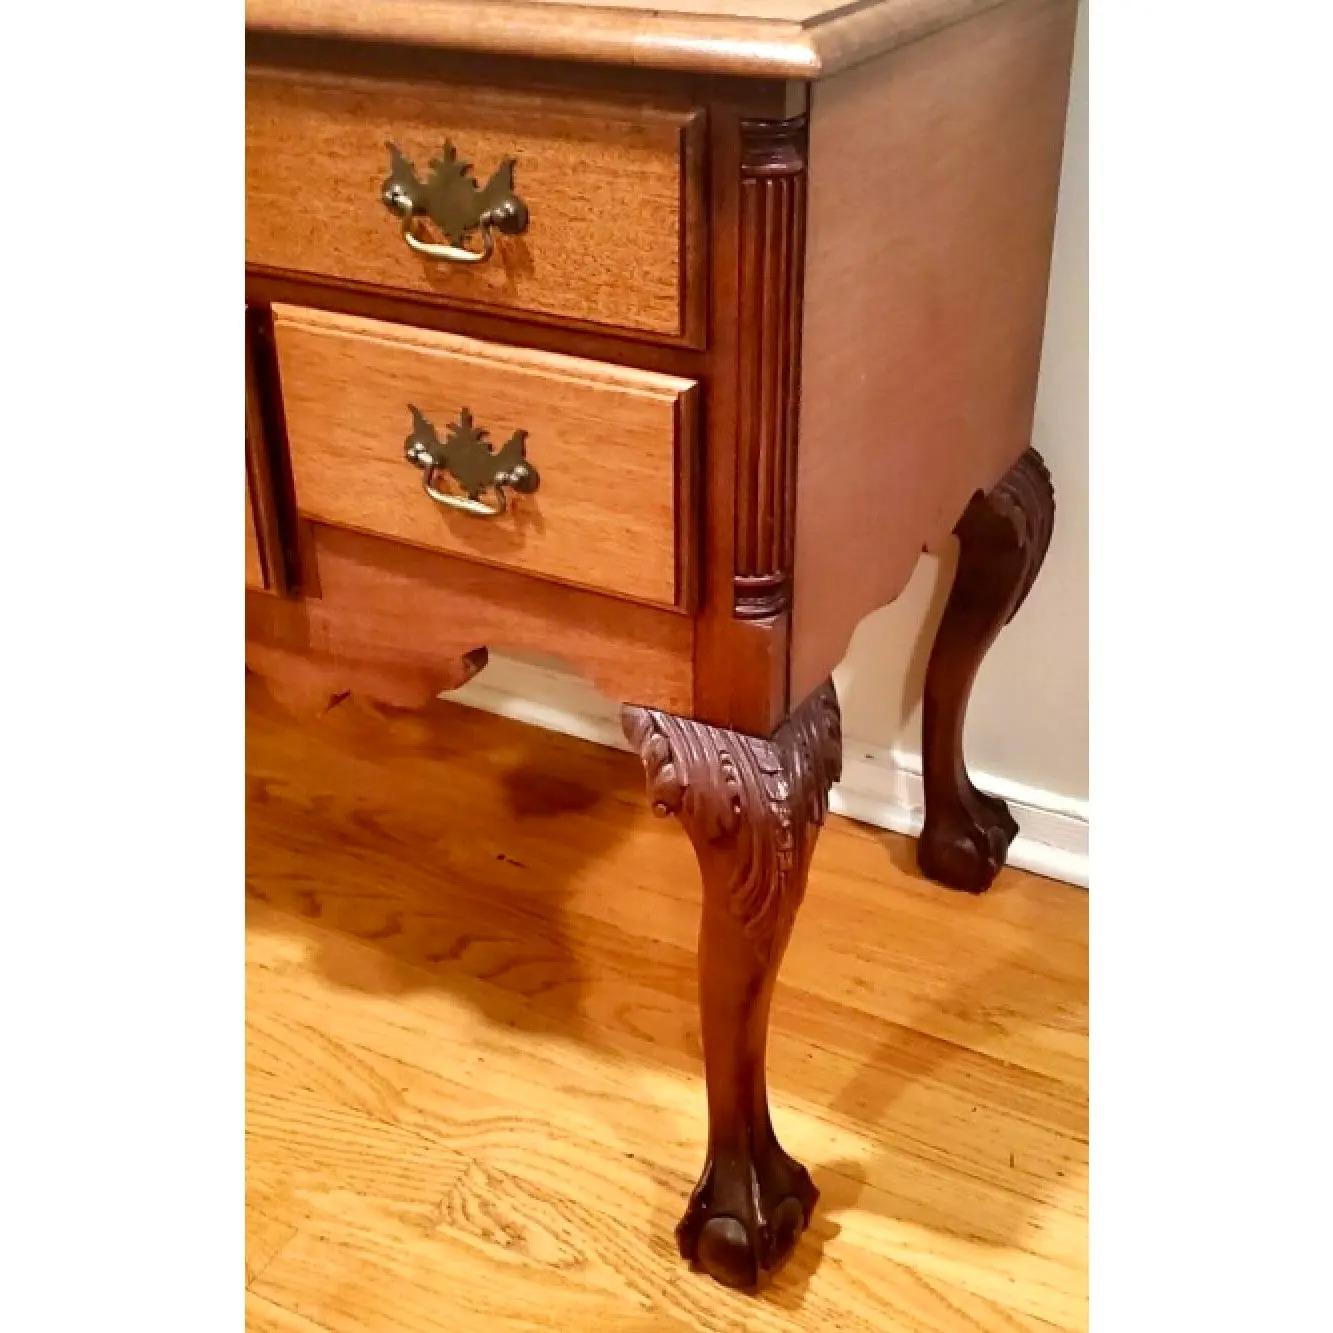 Fantastic vintage Chippendale lowboy. Beautiful hand carved sunrise design. Long and slender cabriolet legs. Acquired from a Palm Beach estate. The lowboy is in great structural shape. Minor scuffs and blemishes appropriate to its age and use. The